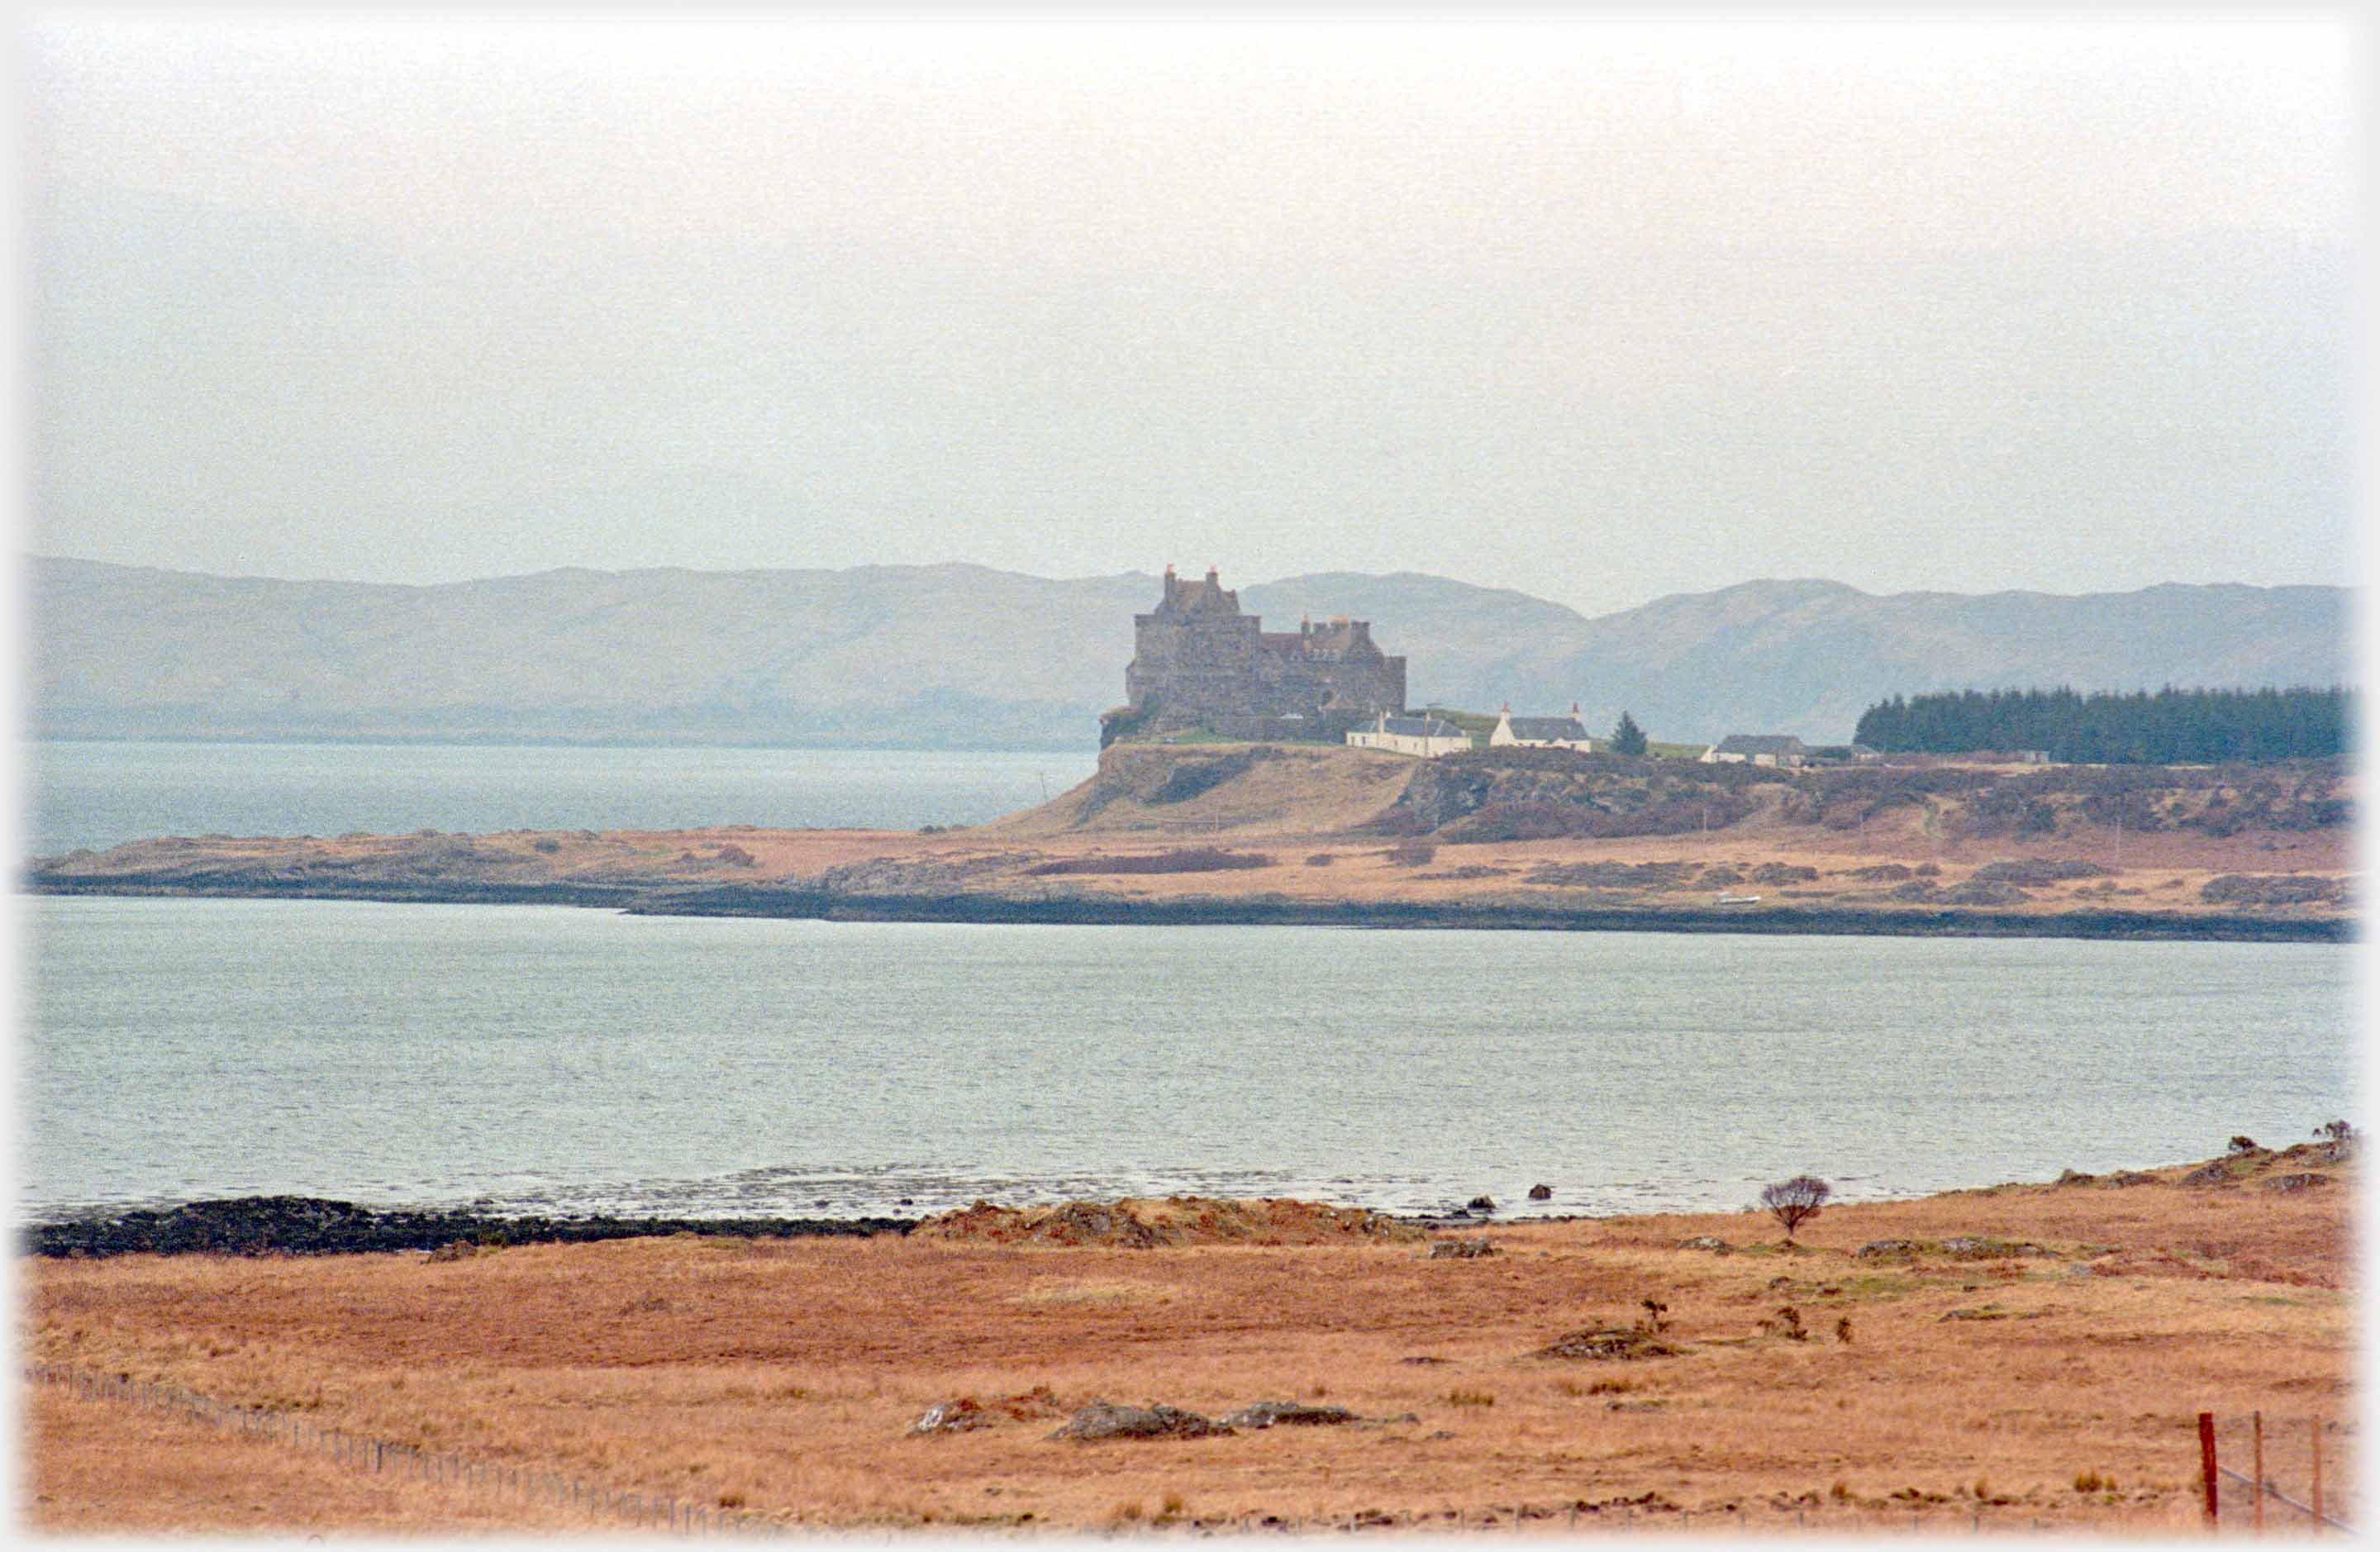 Castle on headland with houses beside it.